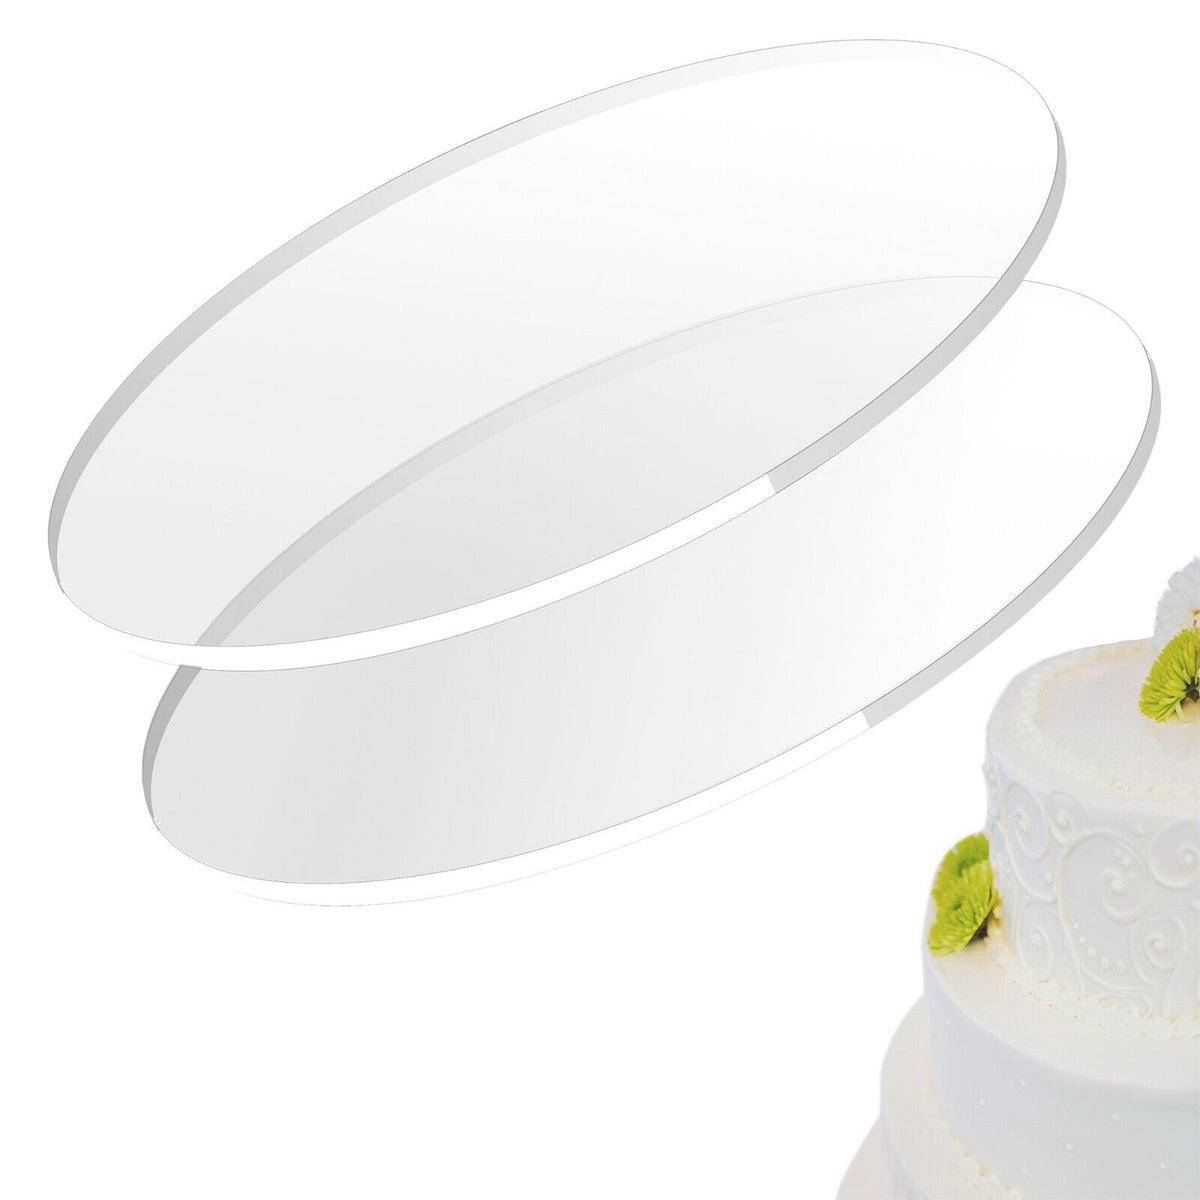 Acrylic Cake Discs - Set of 2 Circles (0.12 inch thick)